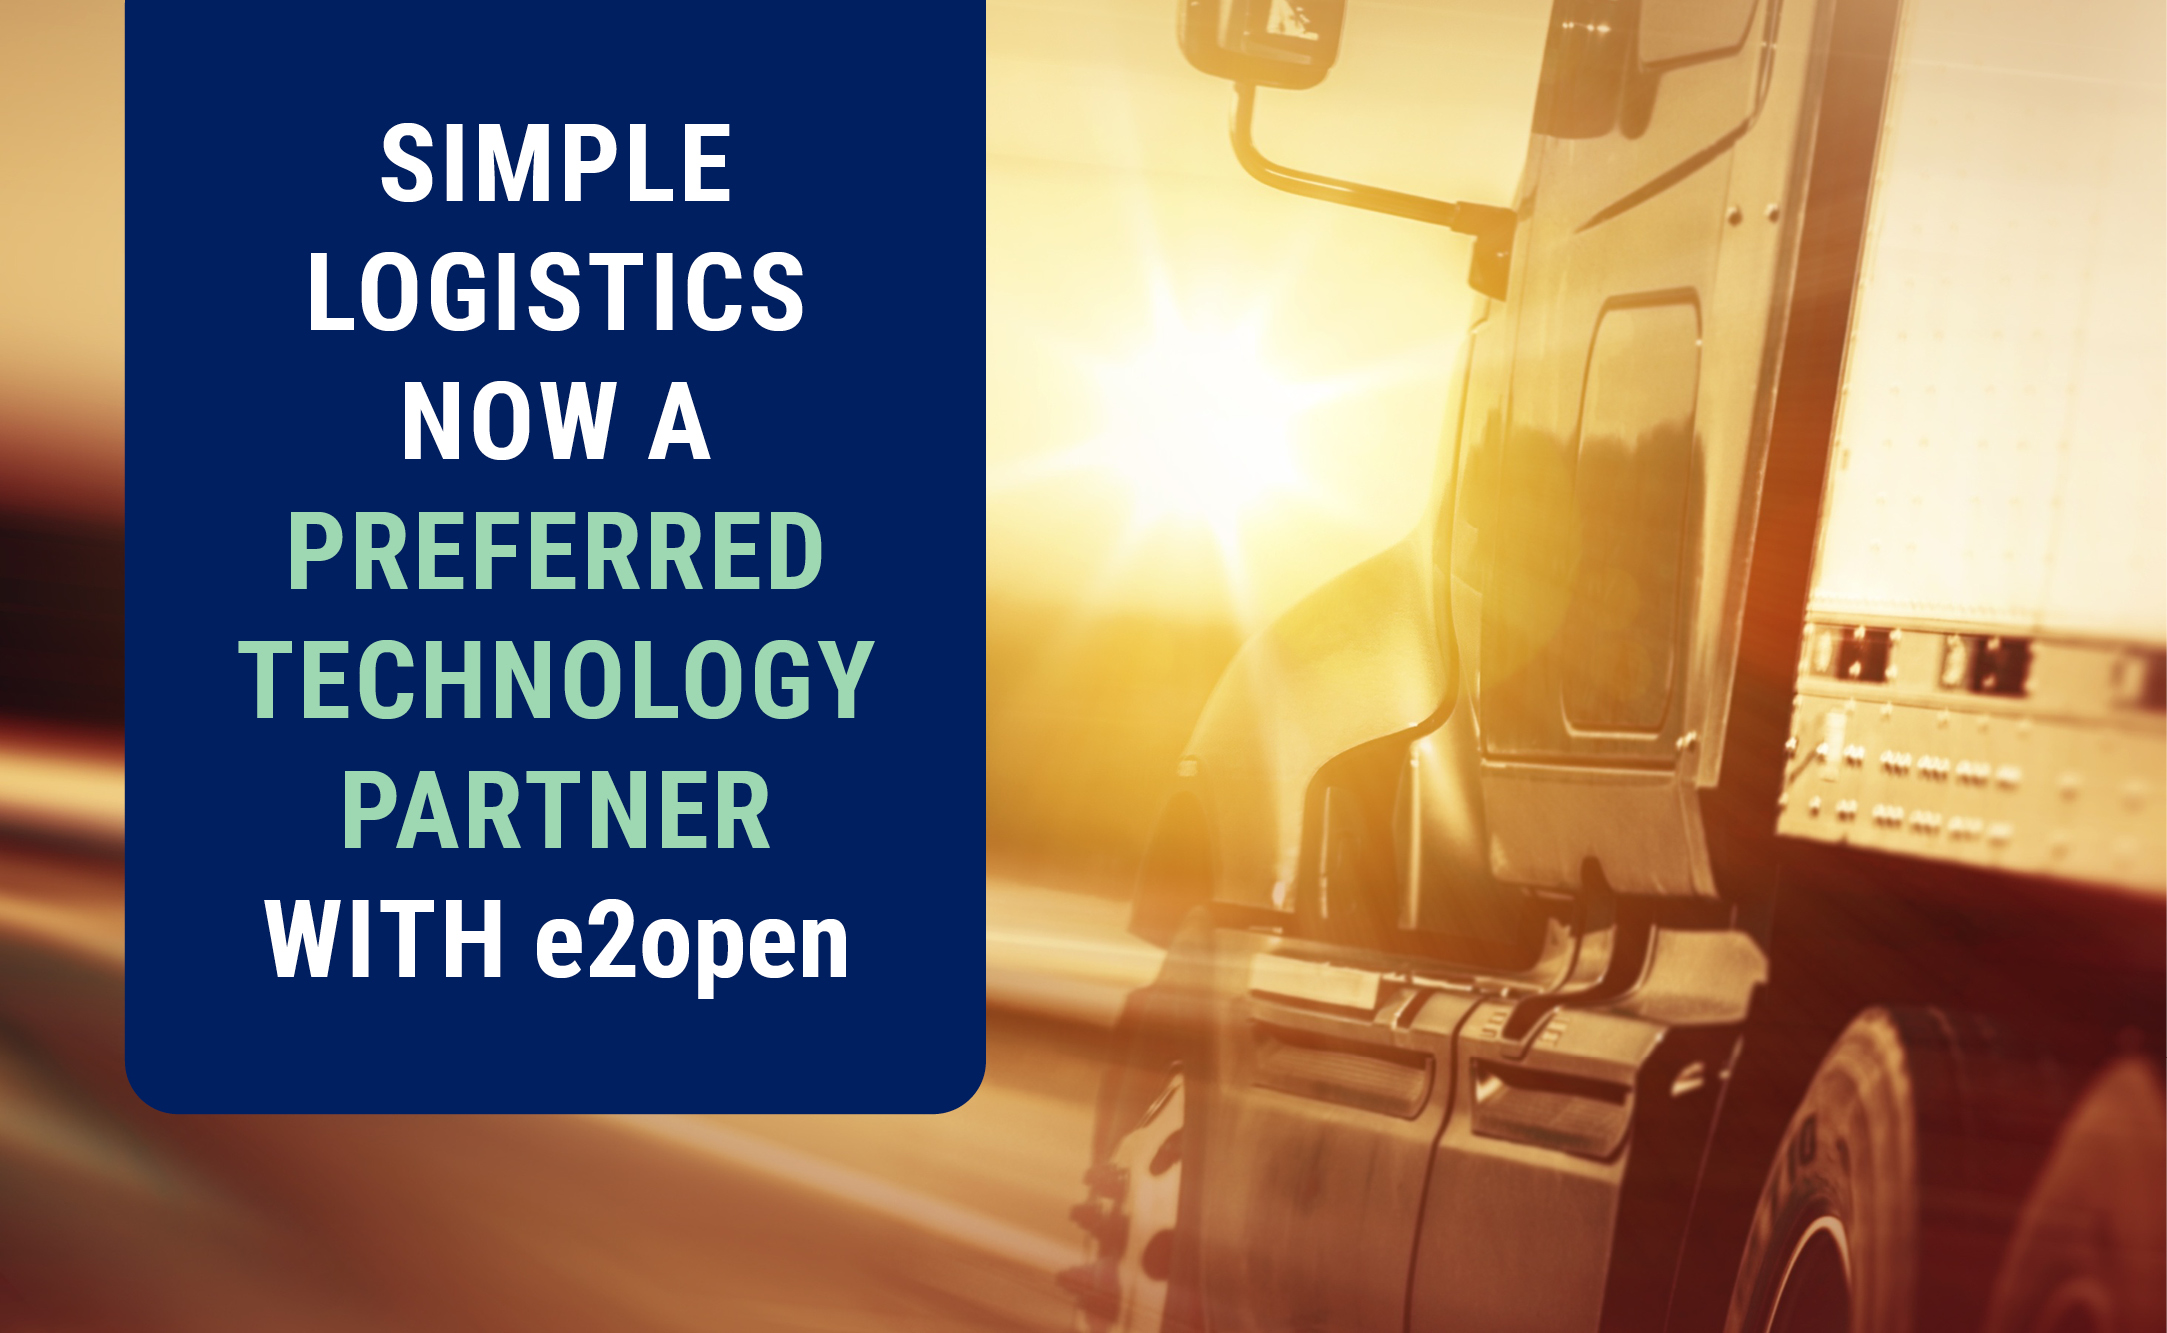 Simple Logistics now a Preferred Technology Partner with e2open